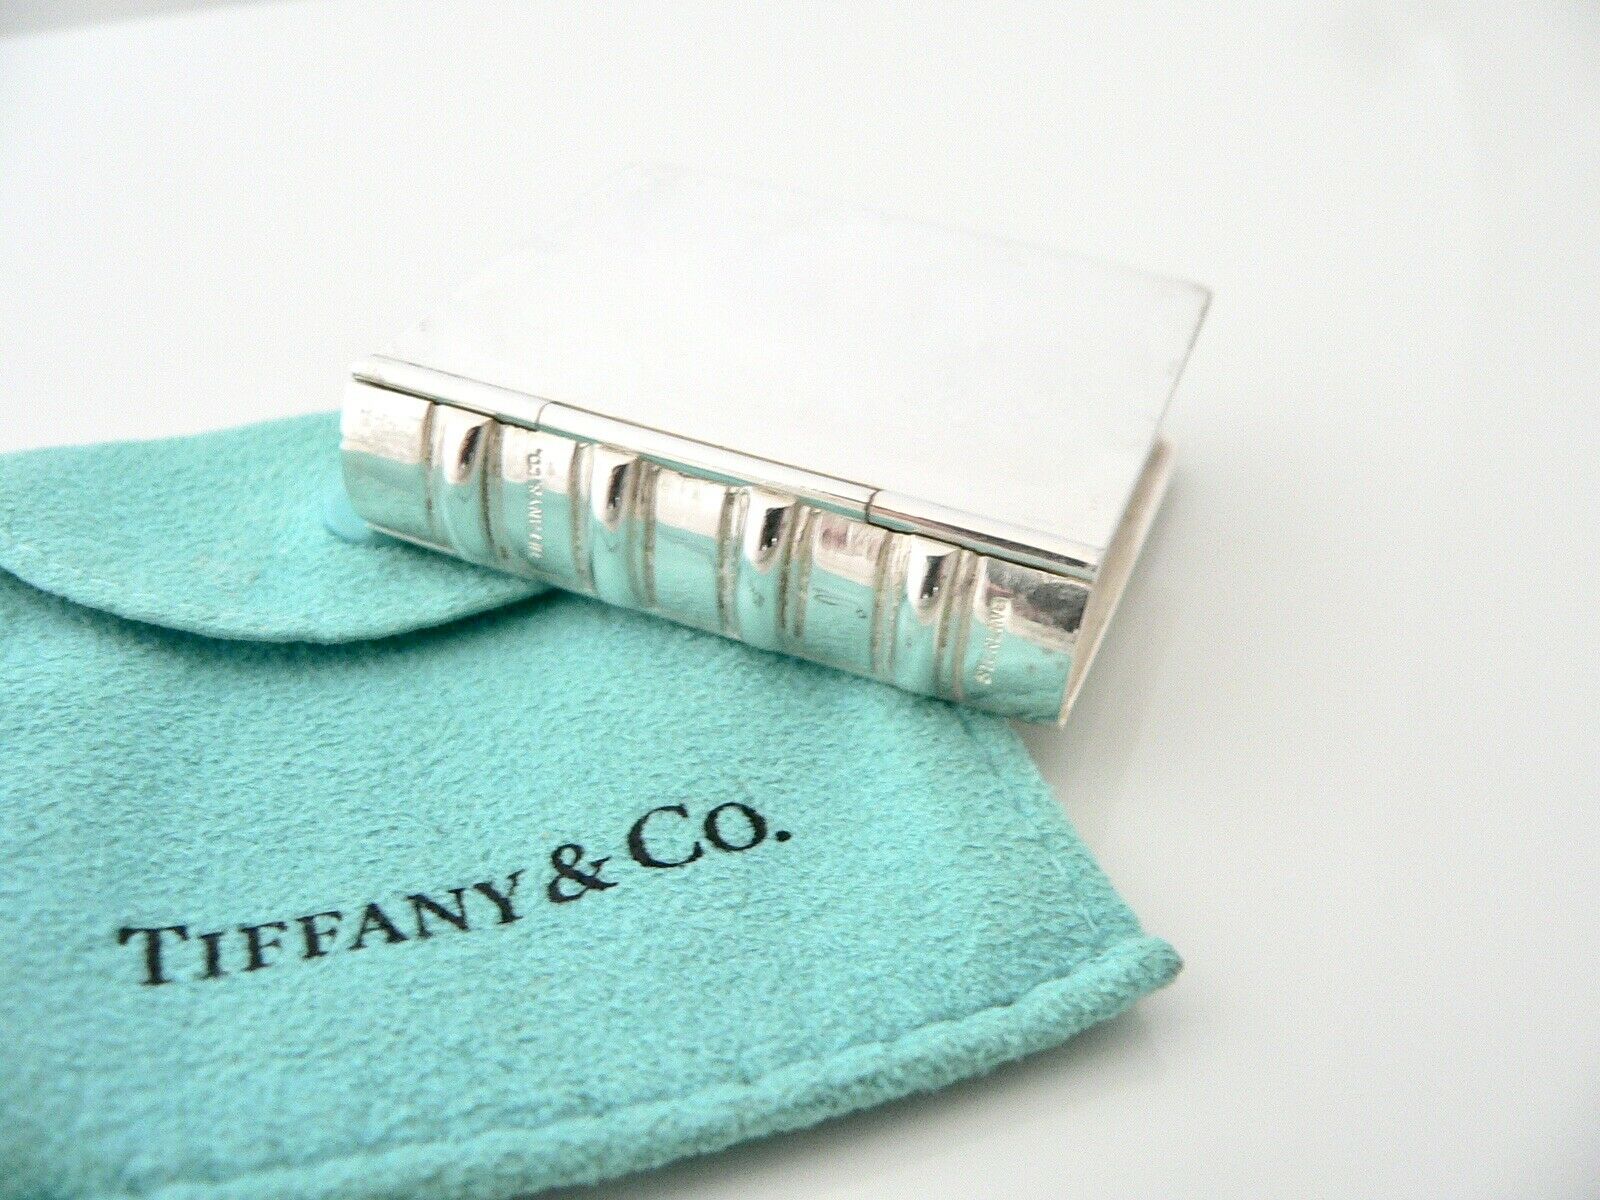 Tiffany & Co Book Pill Box Case Container Pouch Hinge Hinged Gift Love T and Co